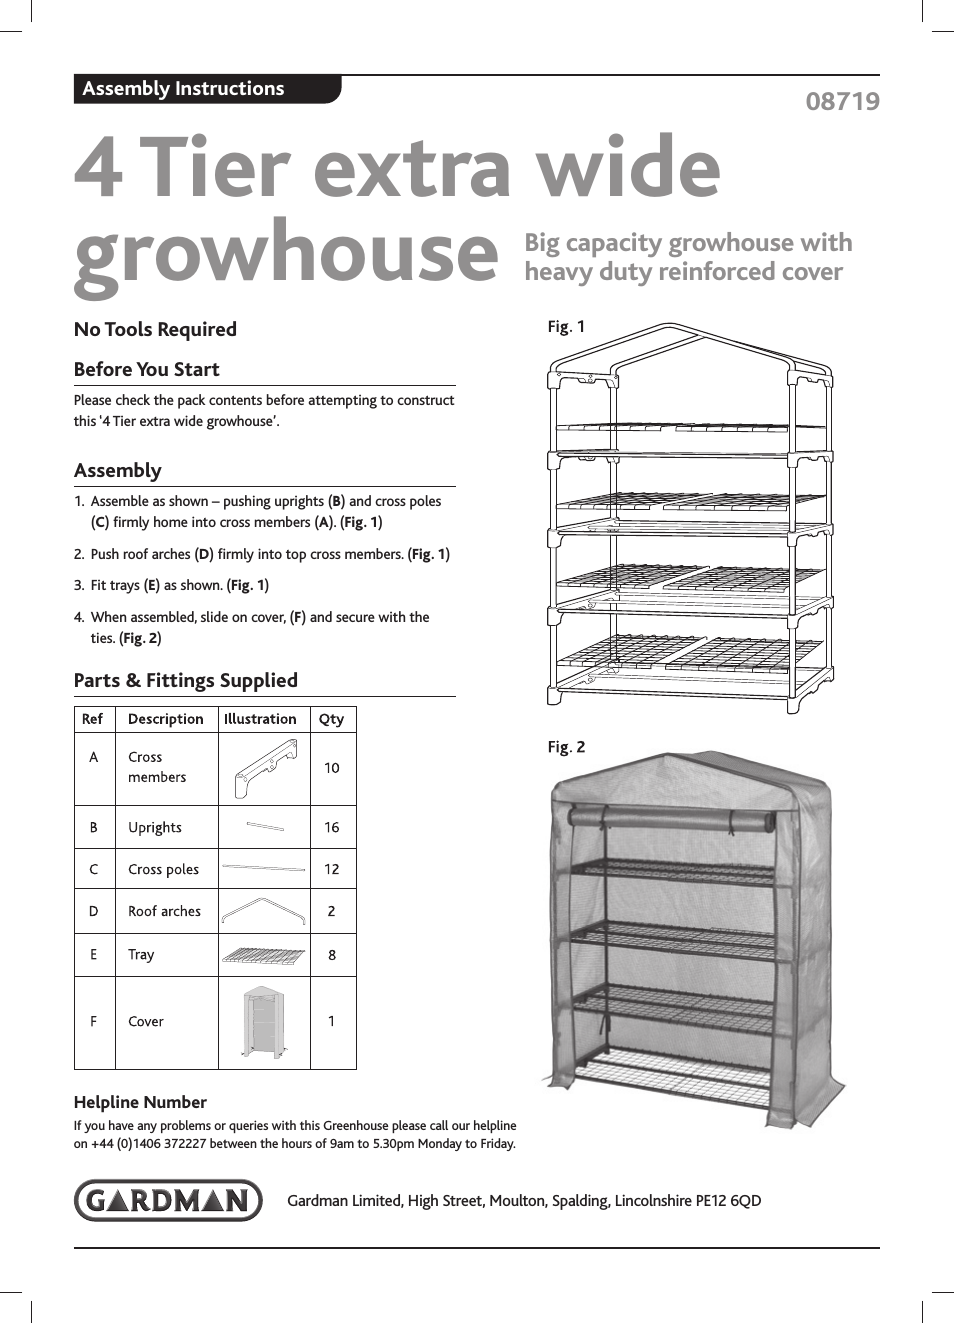 4 Tier extra wide growhouse